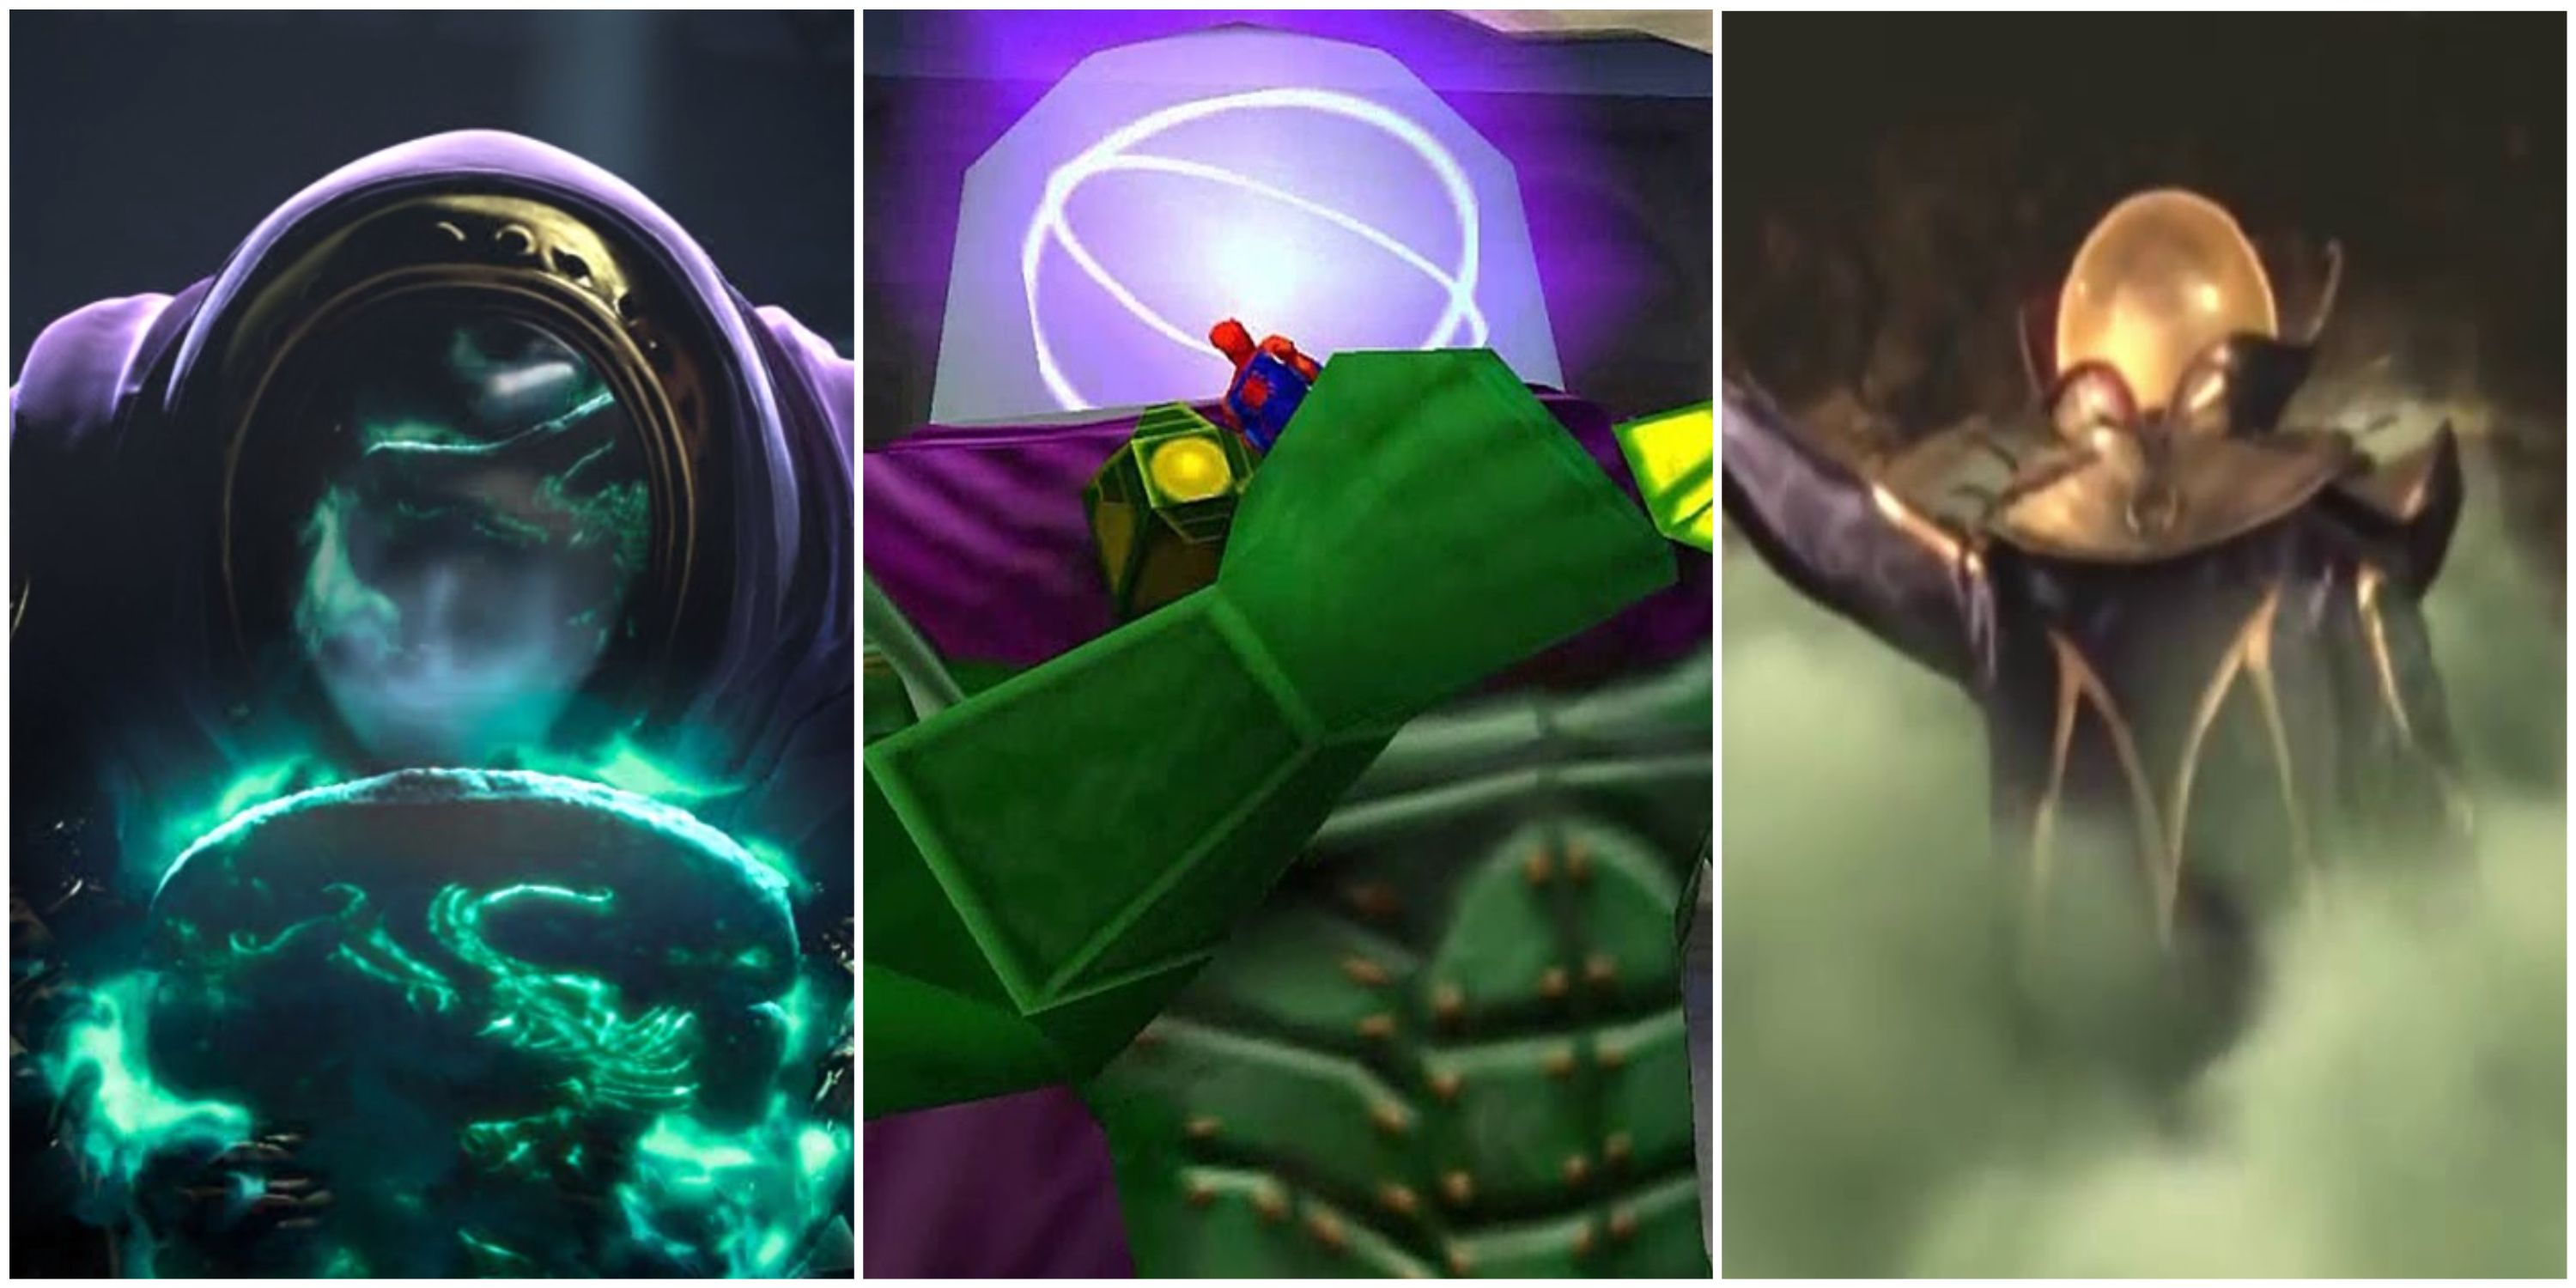 Mysterio in Spider-Man 2000, Spider-Man 2, and Shattered Dimensions